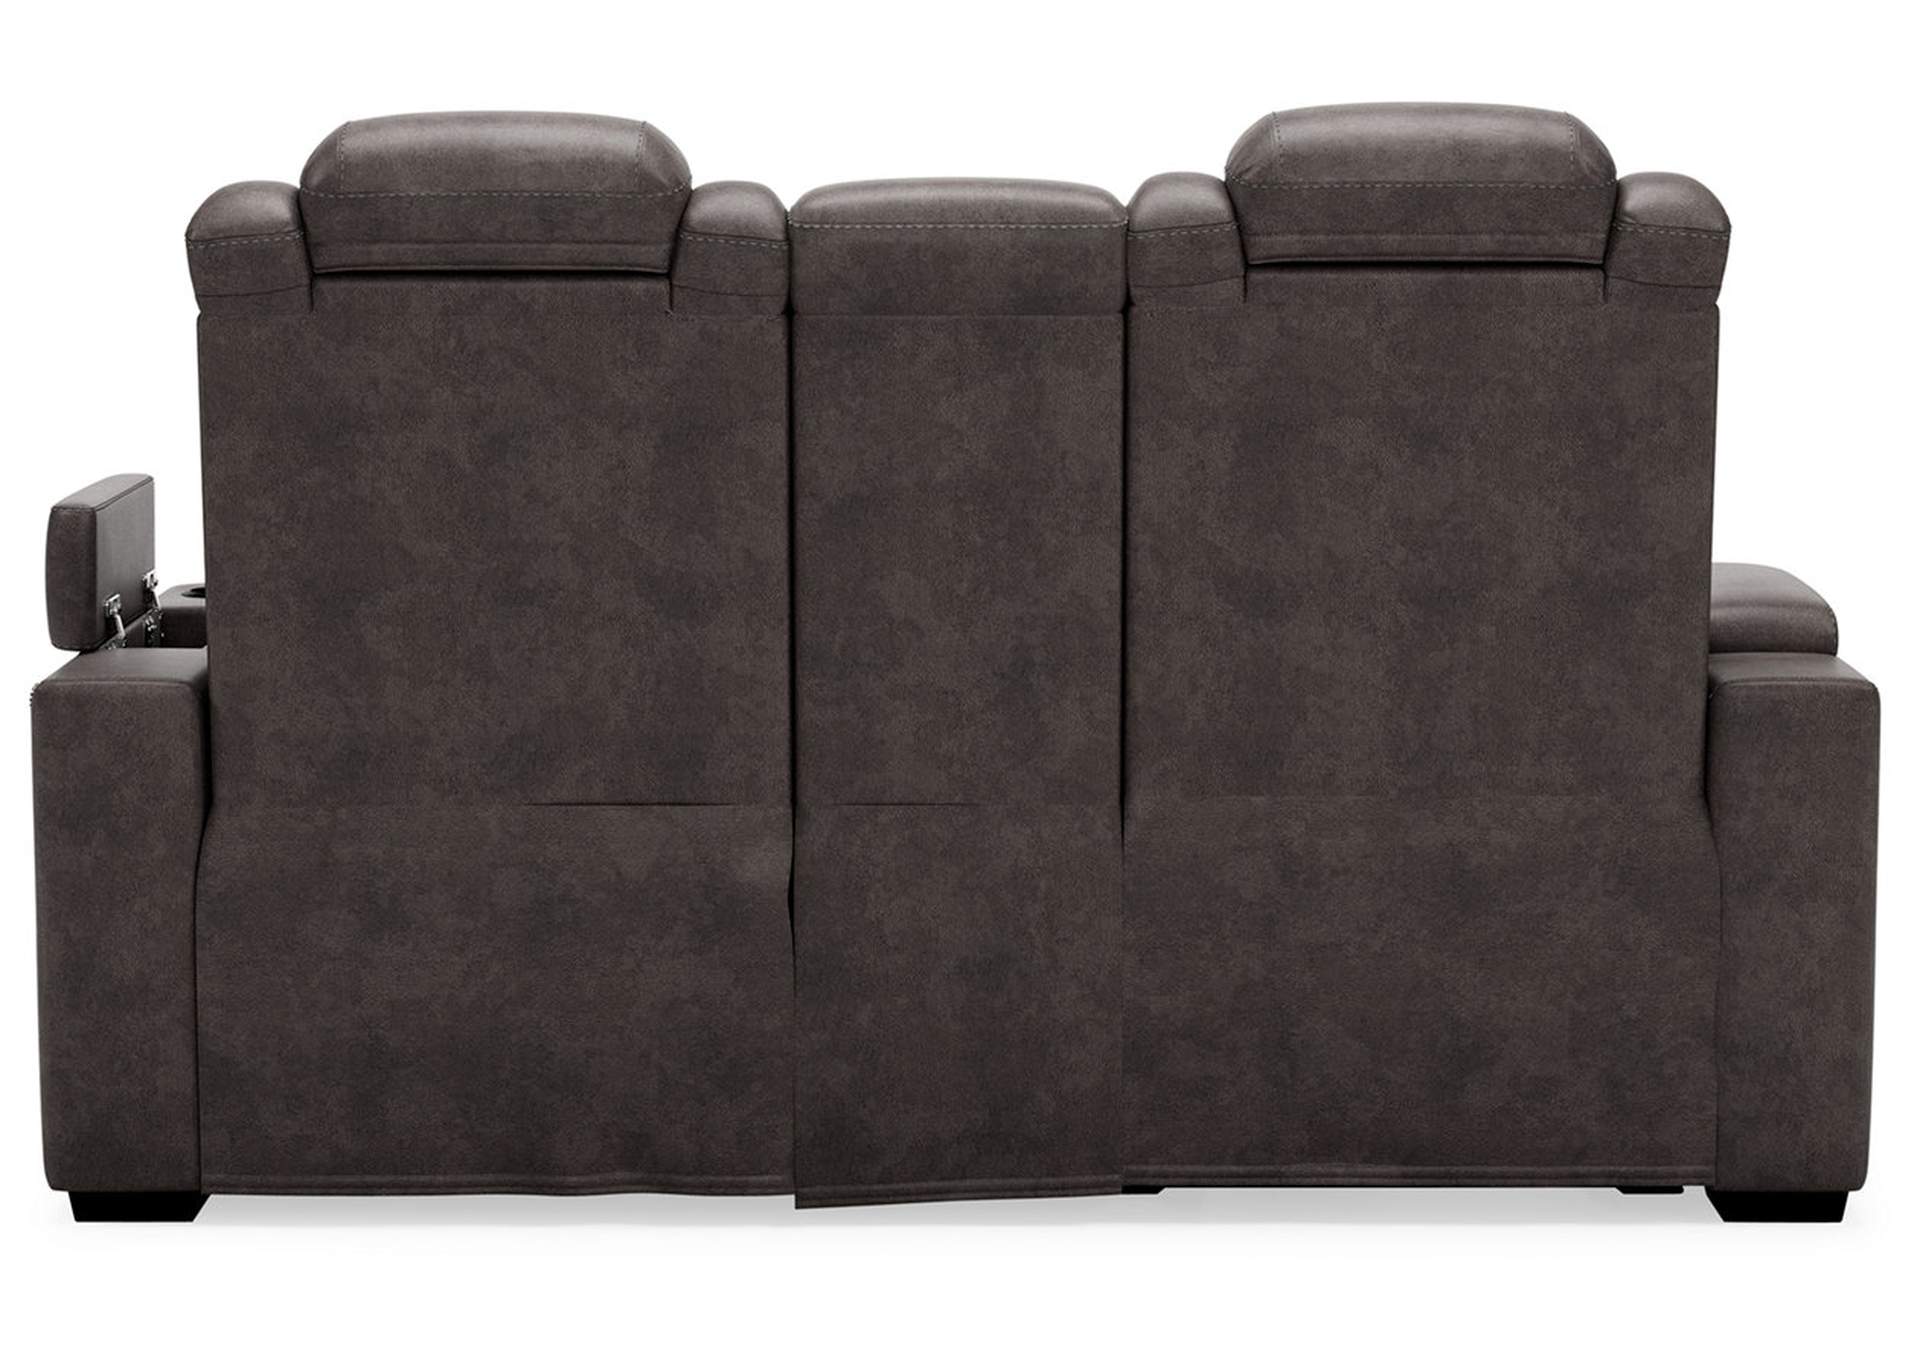 HyllMont Power Reclining Loveseat with Console,Signature Design By Ashley